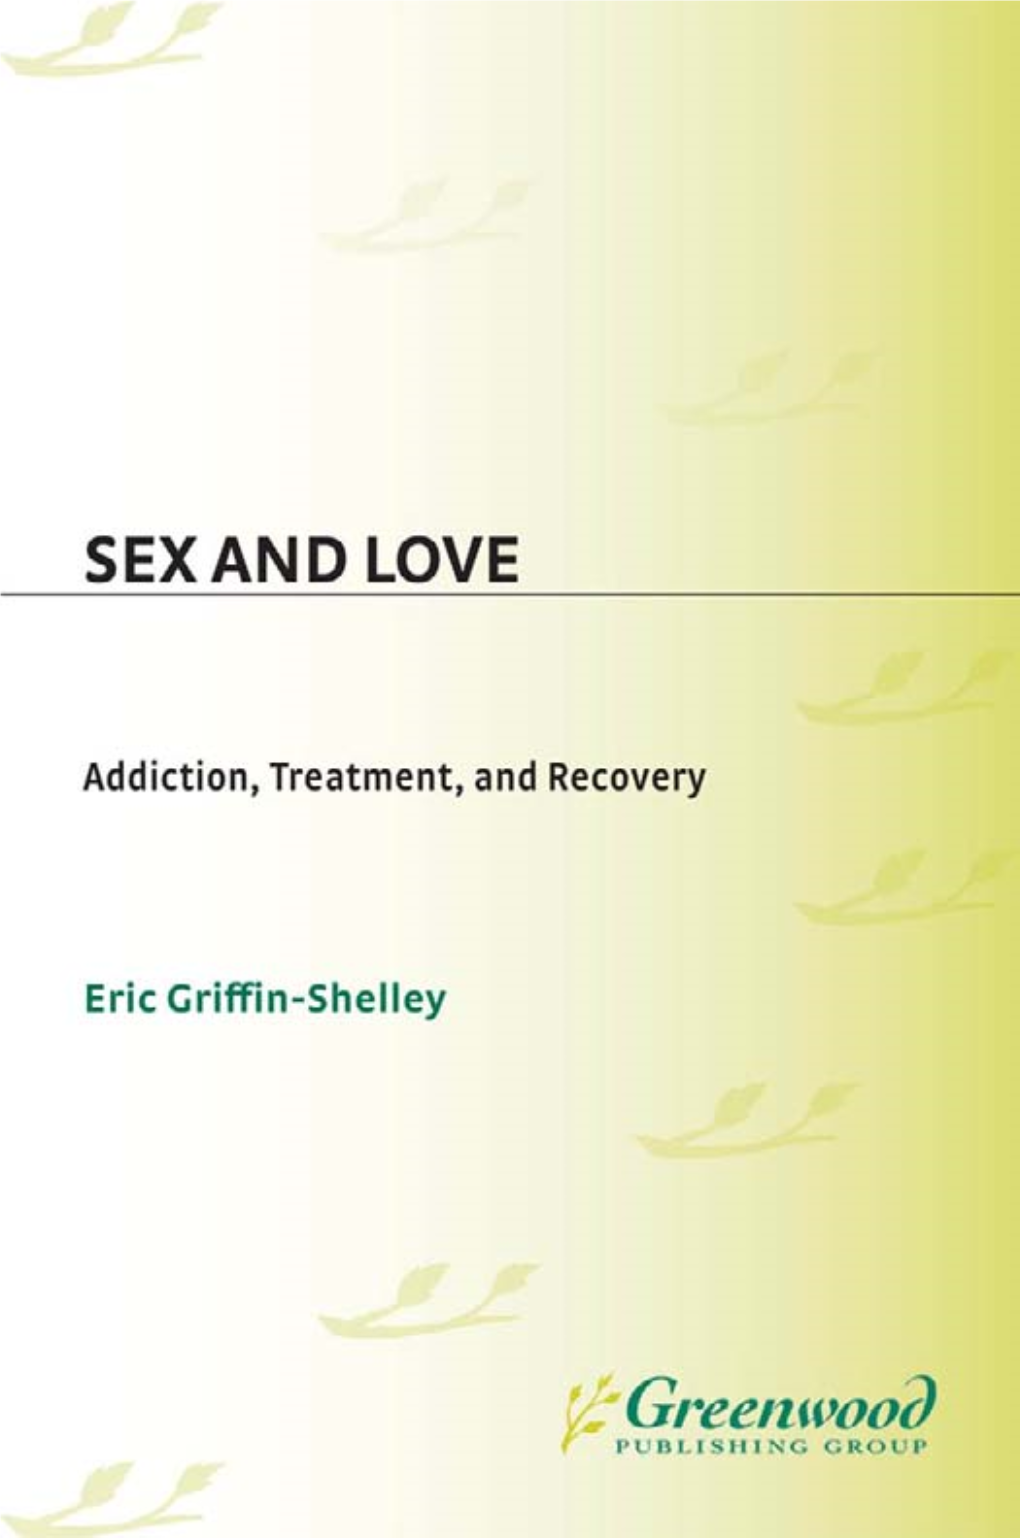 Love ADDICTION, TREATMENT, and RECOVERY